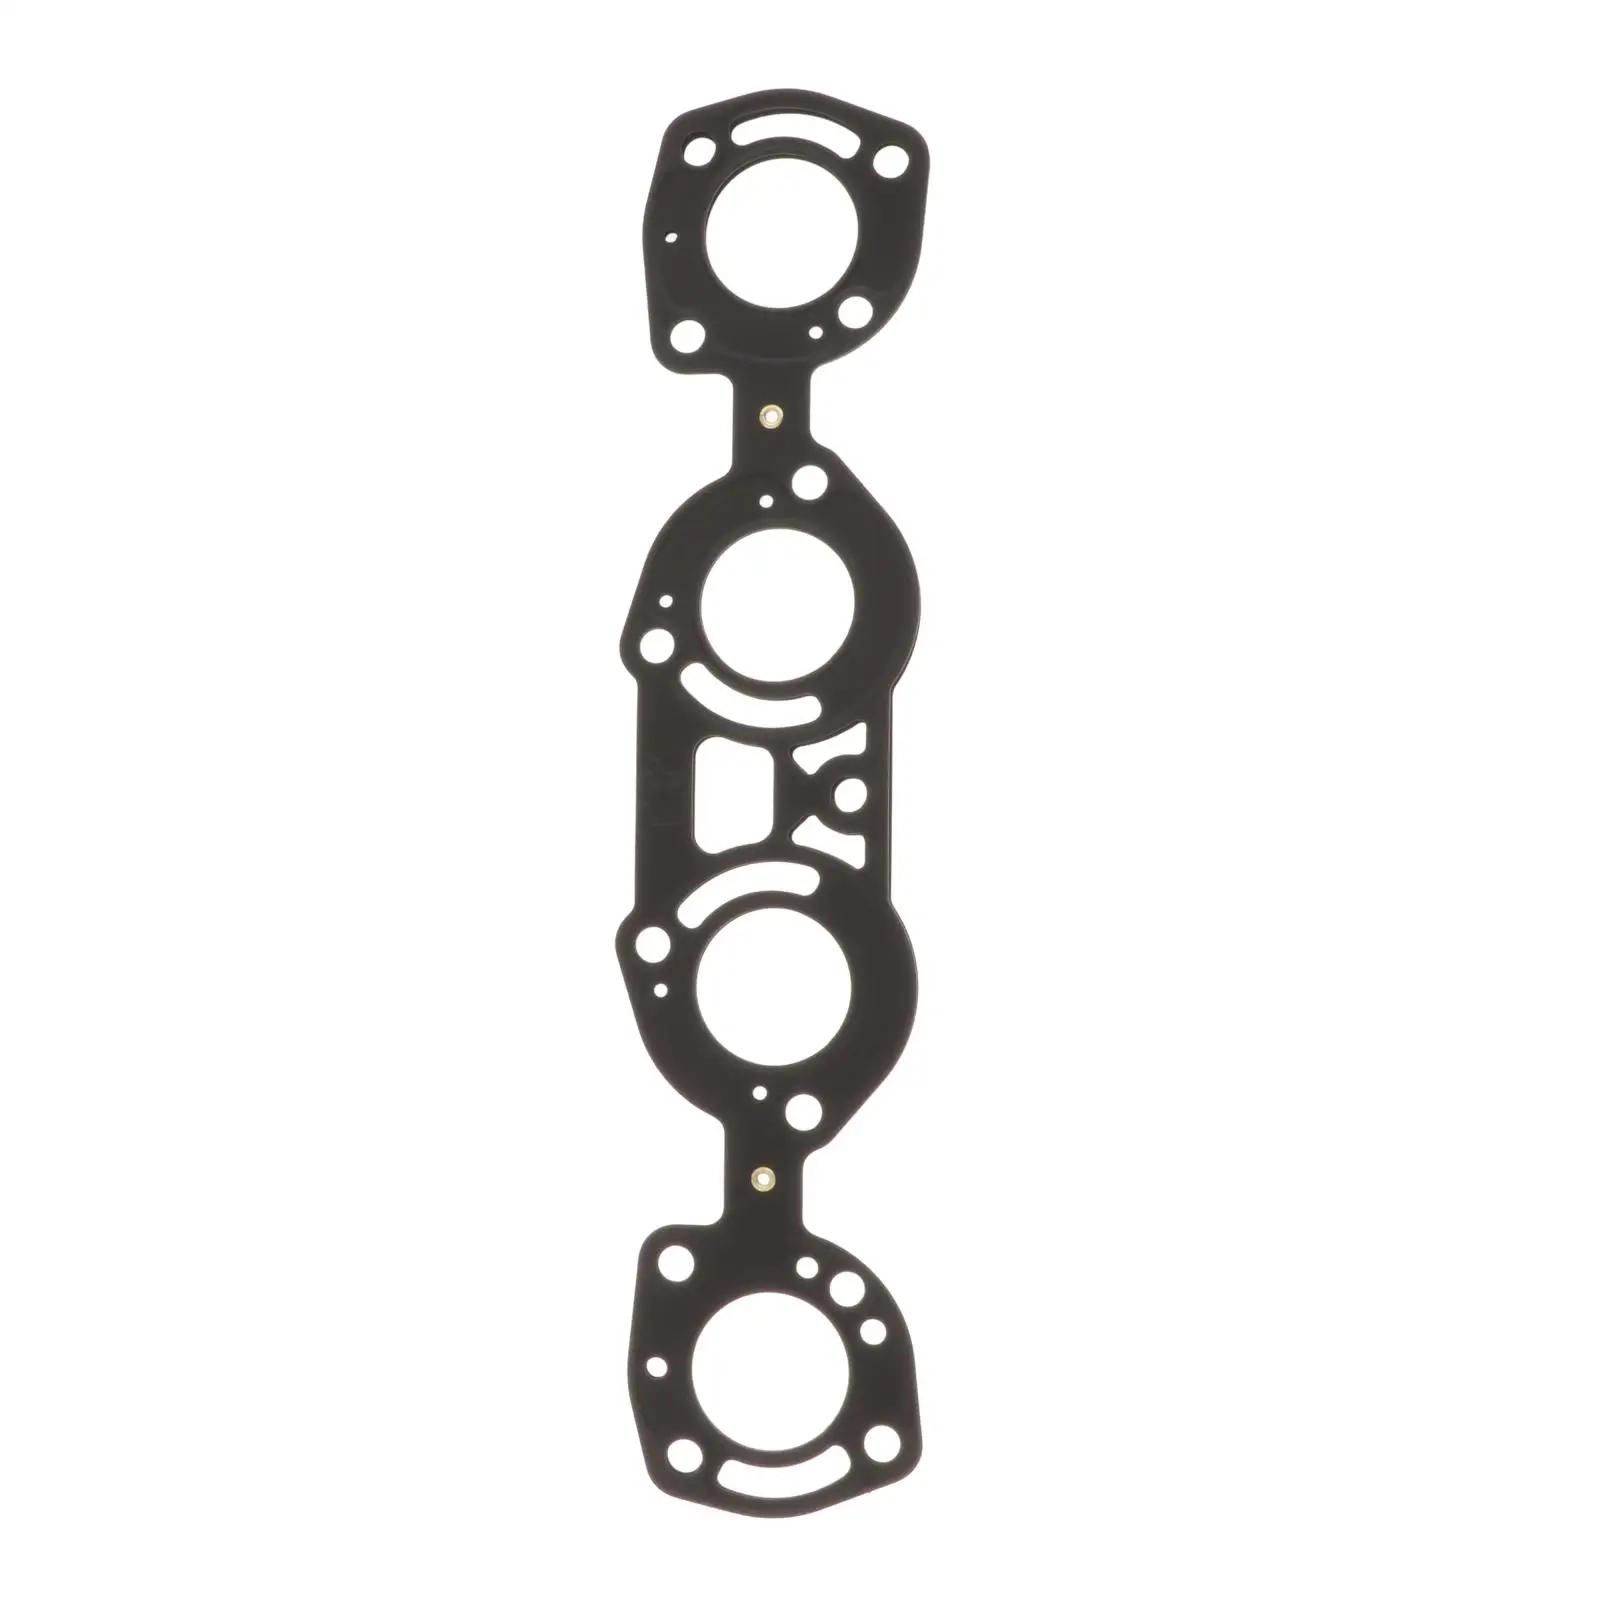 Exhaust Manifold Gasket Fit for Yamaha FZR1800 6ET-14613-00-00 Replacement Parts Accessories